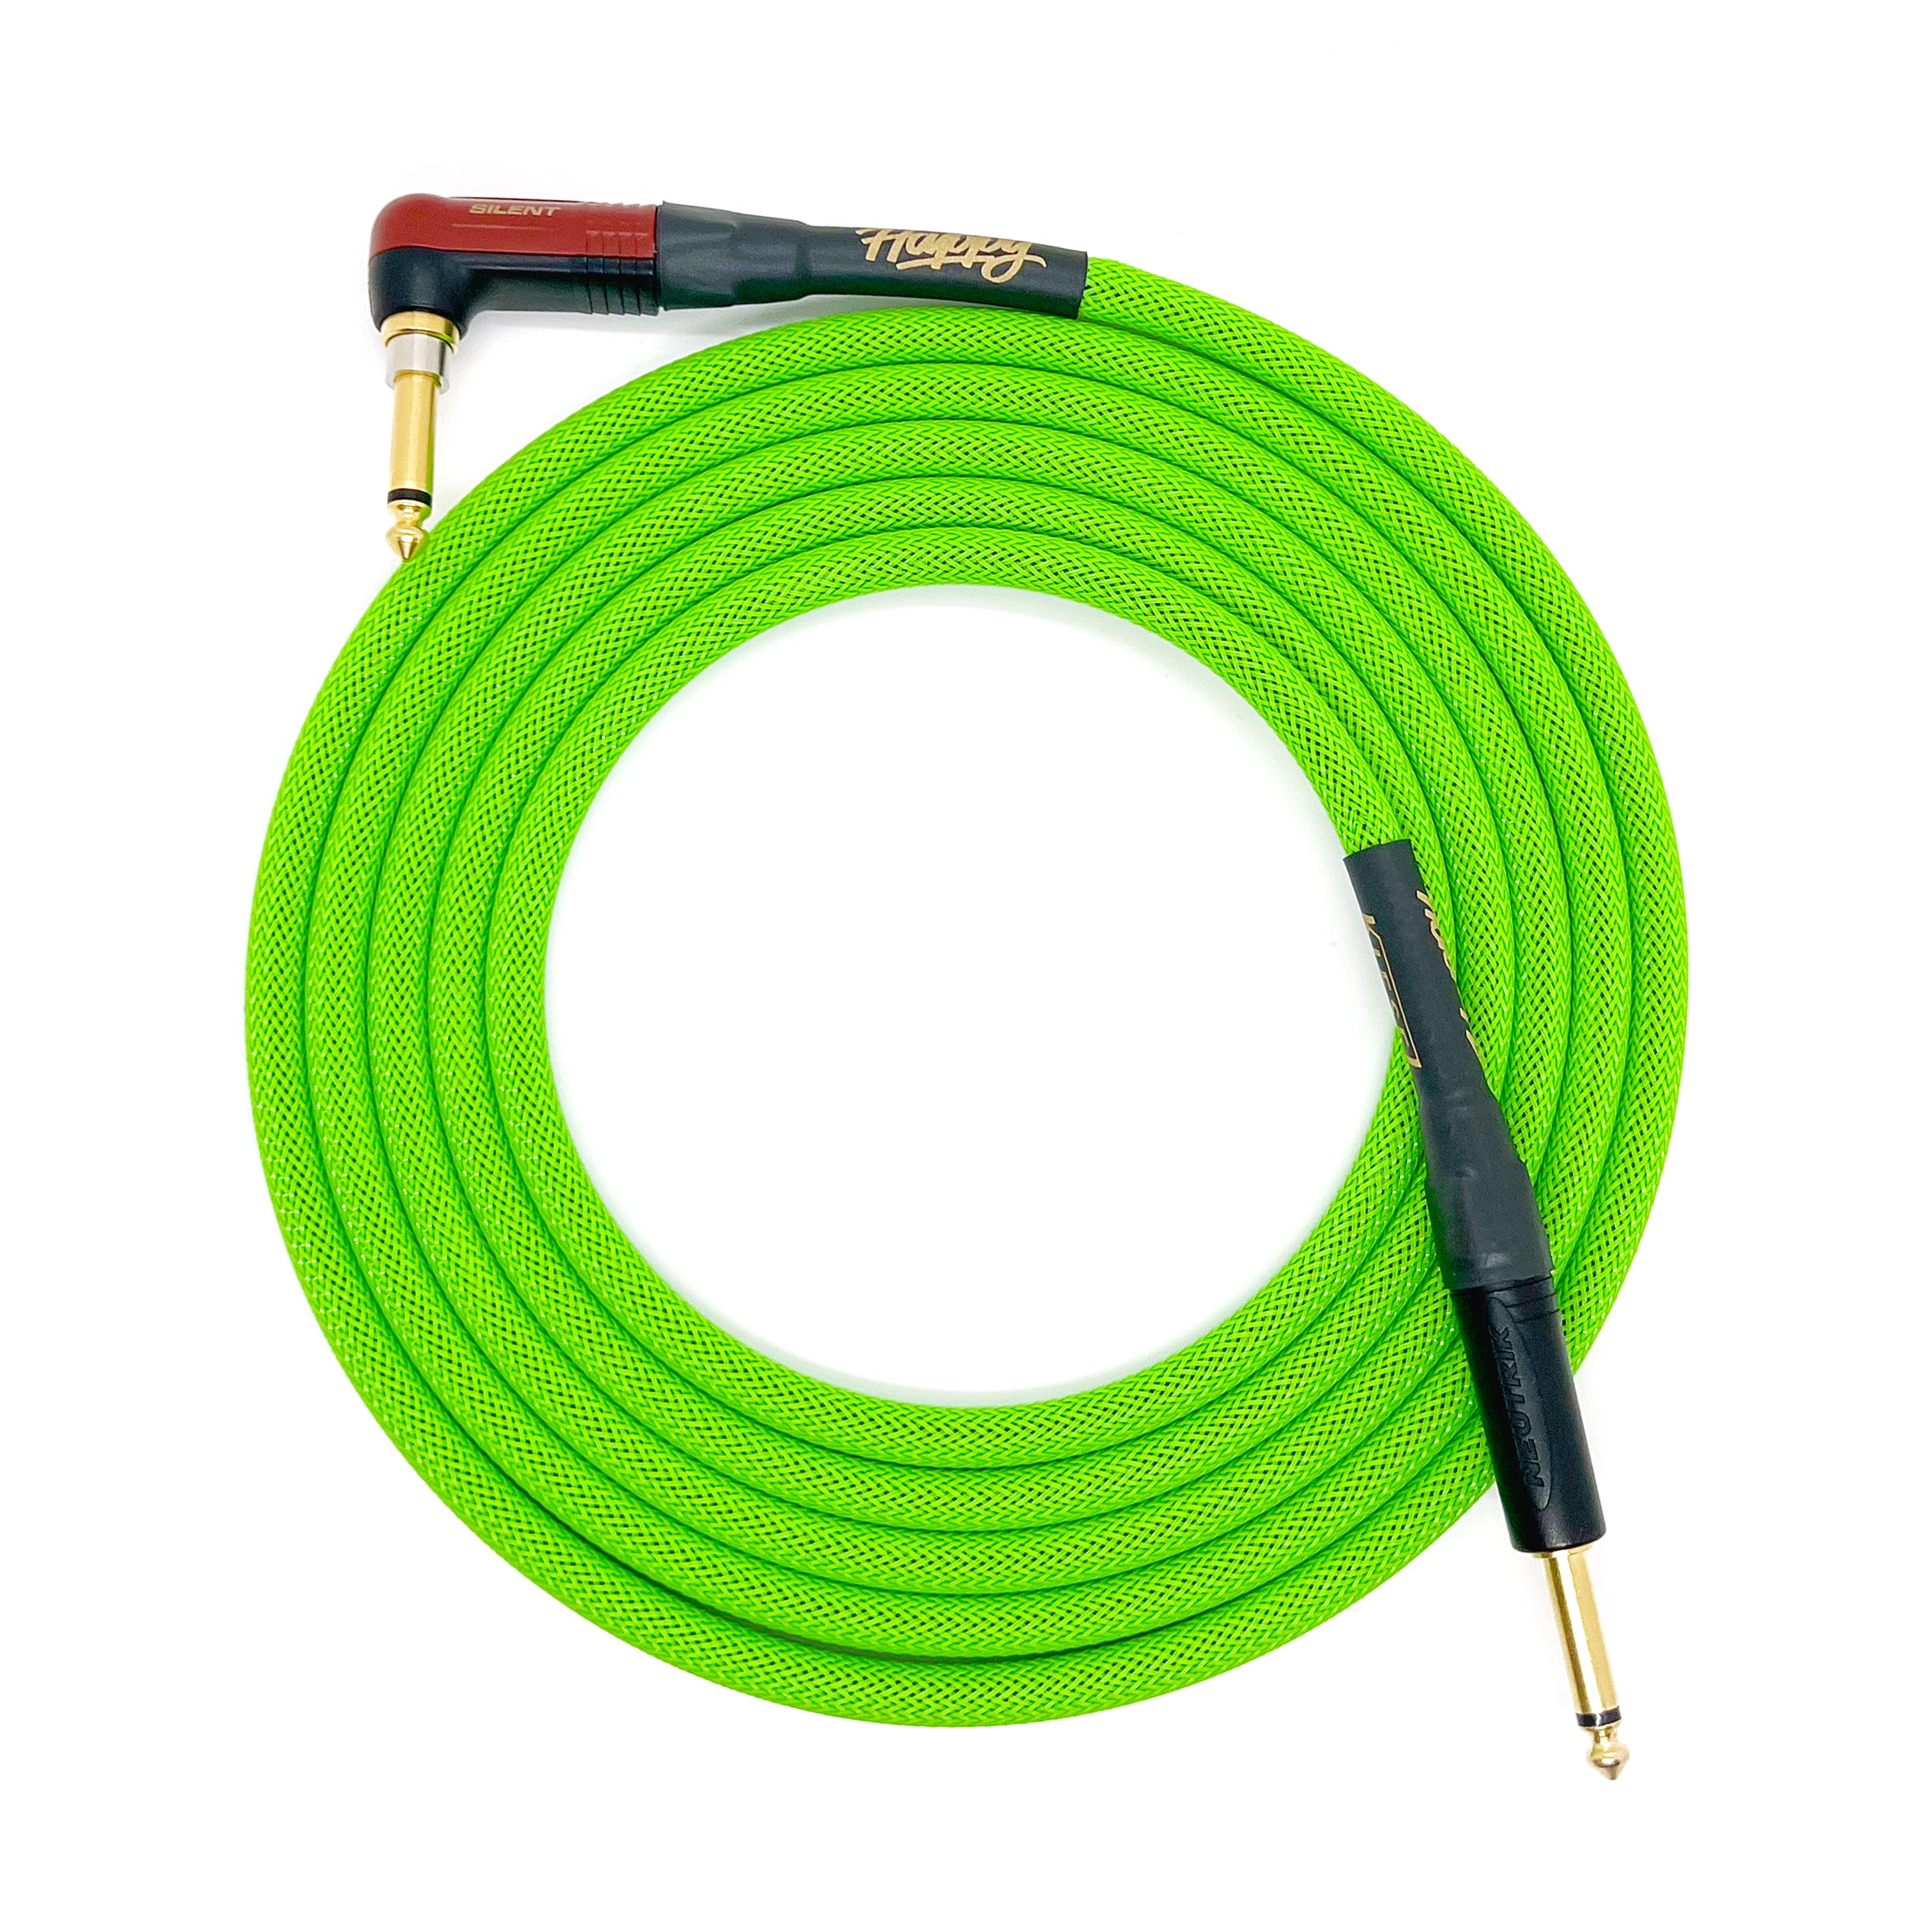 The Kiesel Silent Instrument Cable - Atomic Green